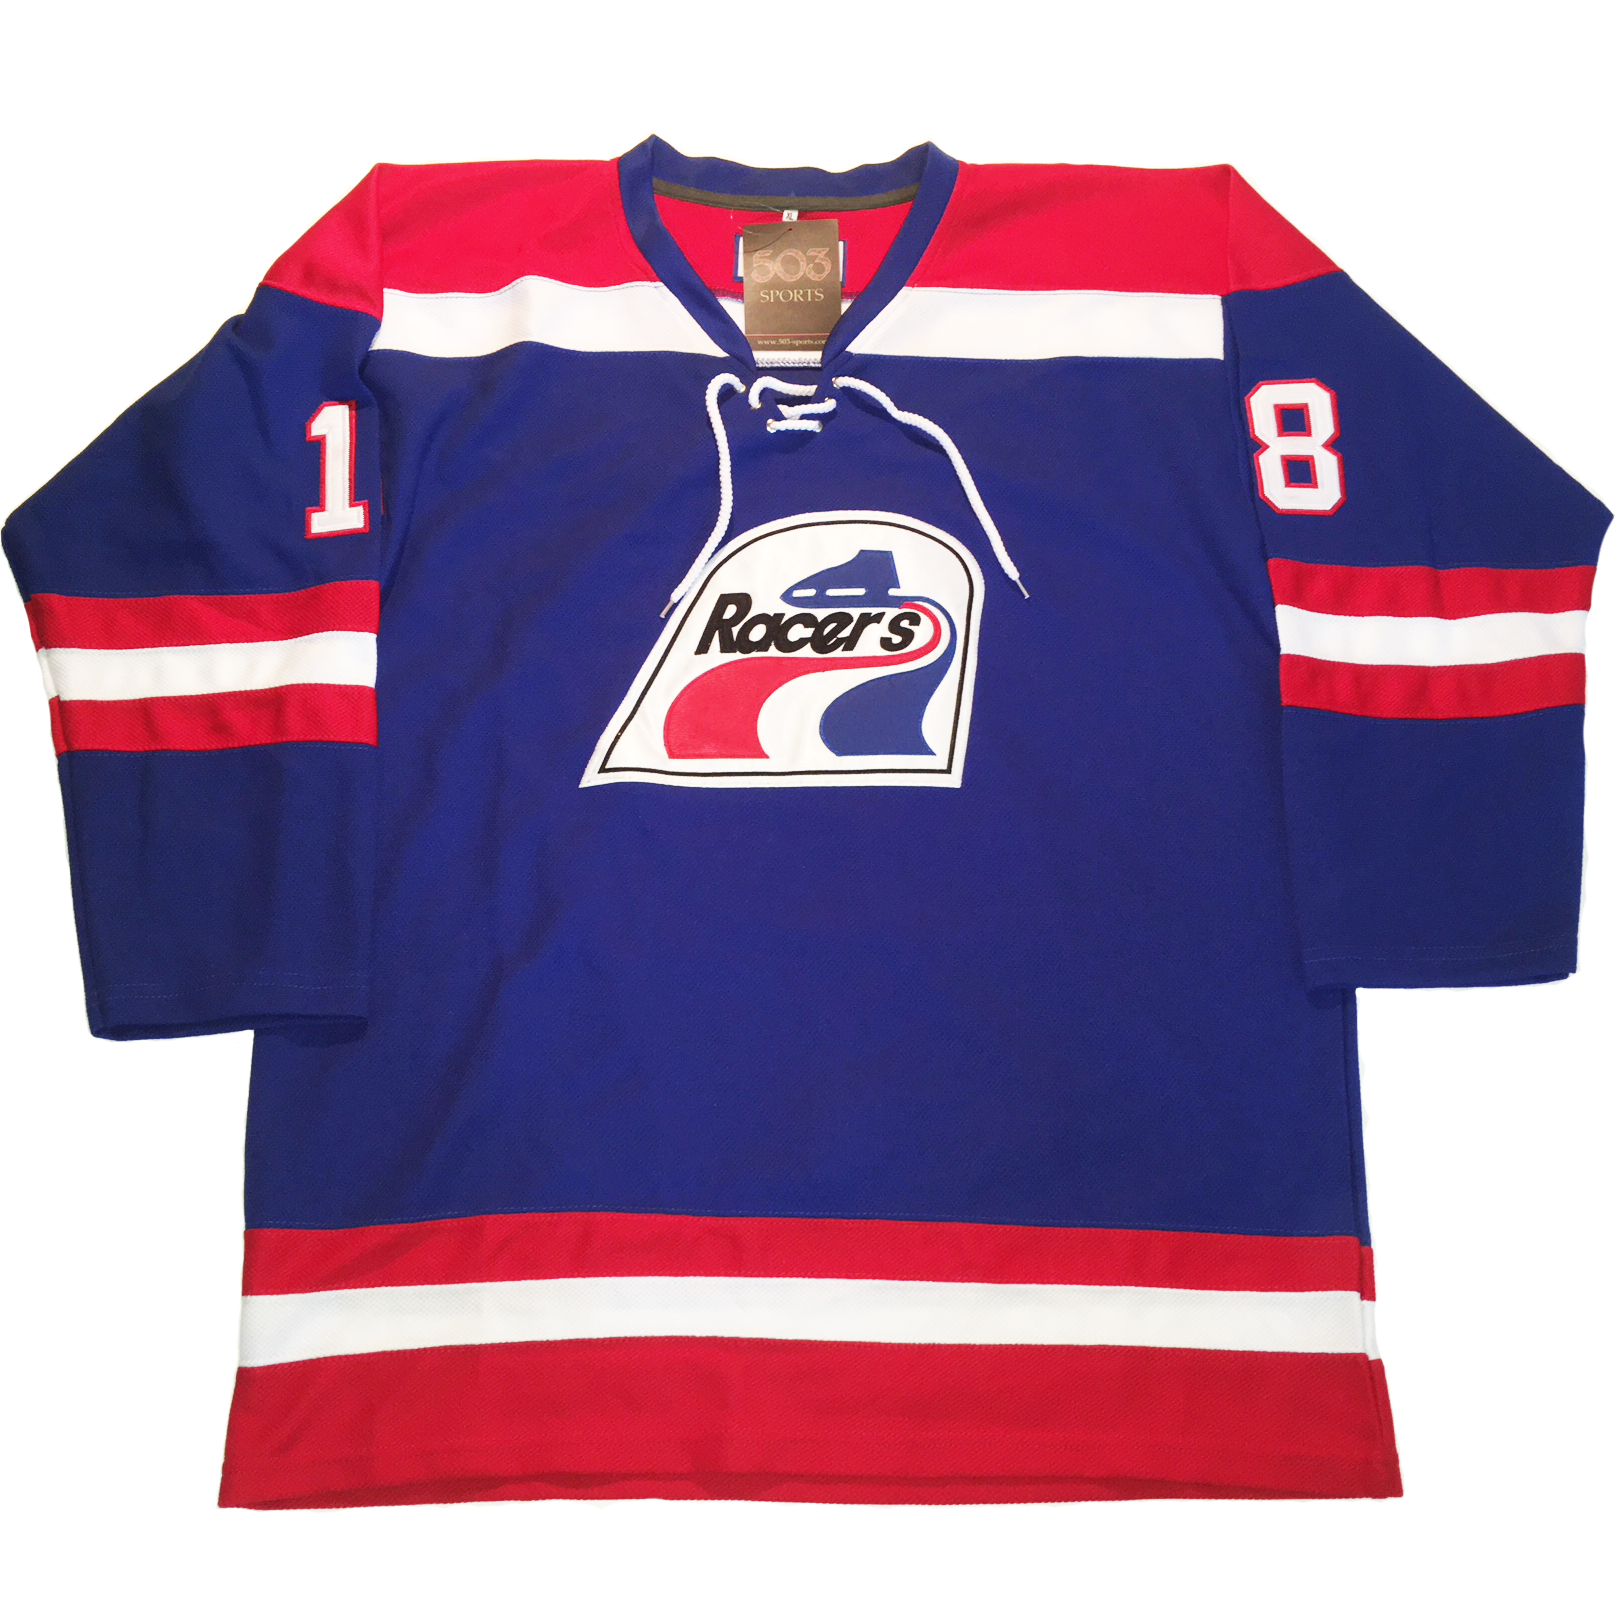 mark messier indianapolis racers jersey (1686955982917)